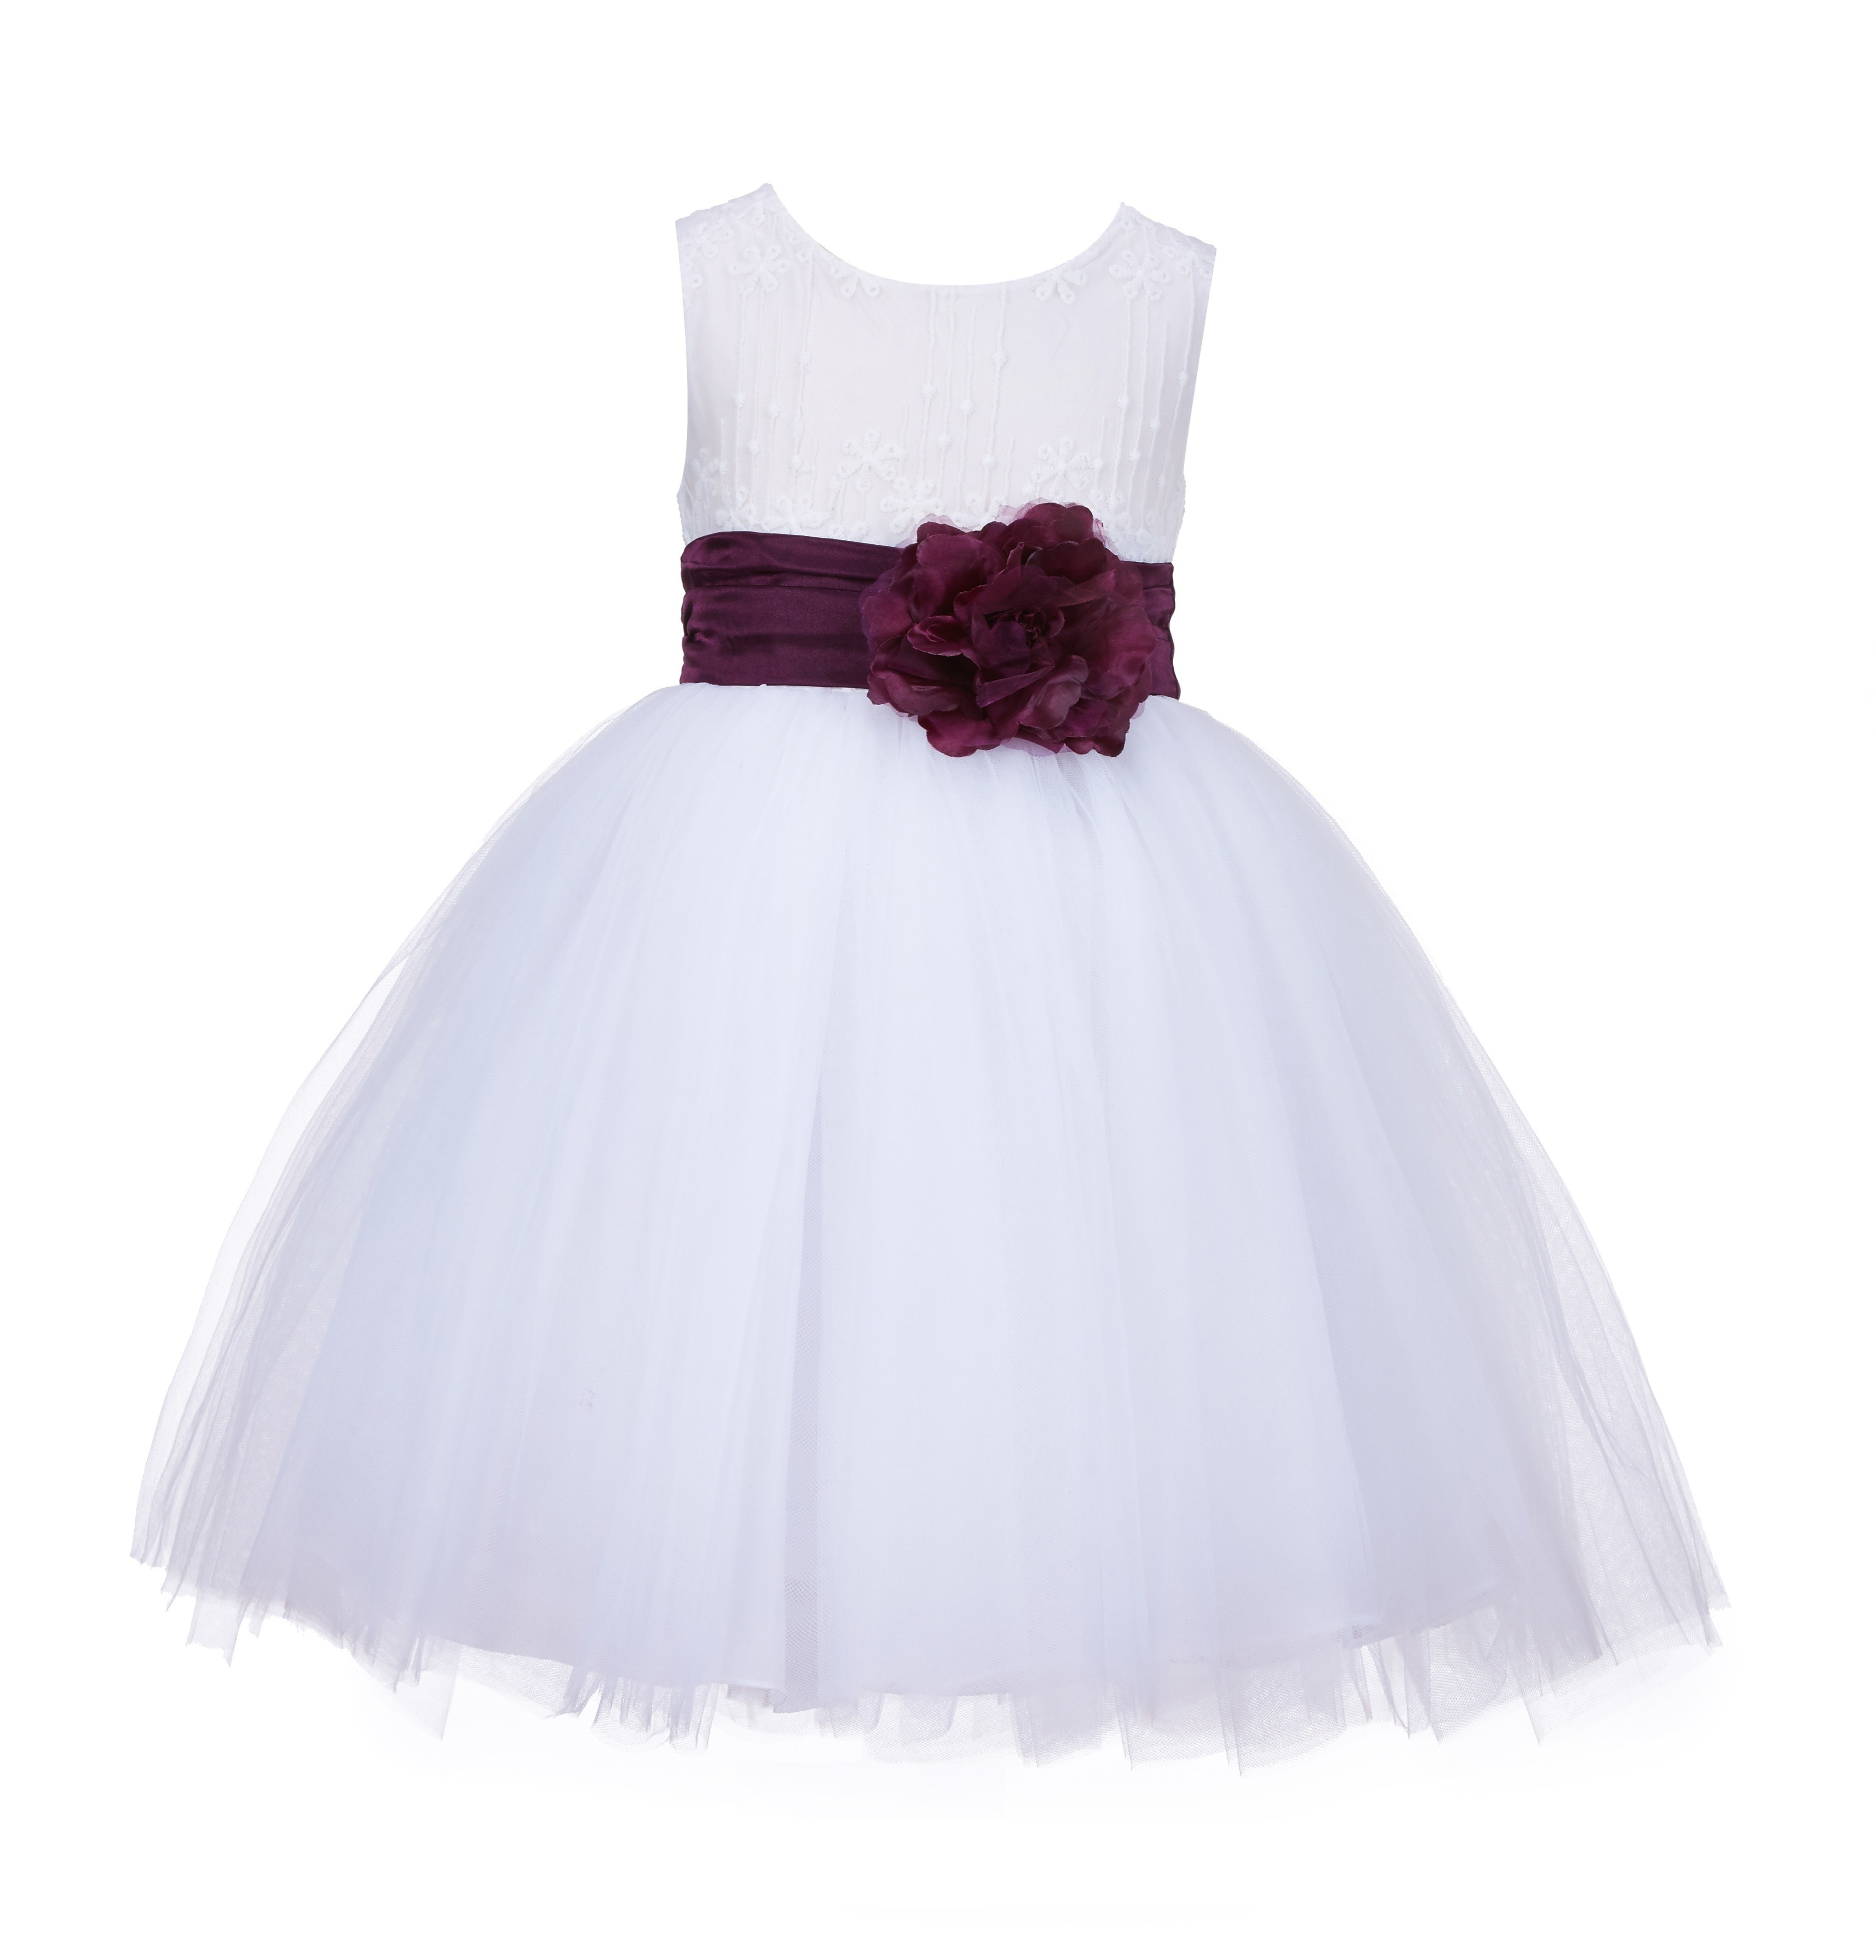 White/Plum Lace Embroidery Tulle Flower Girl Dress Wedding 118